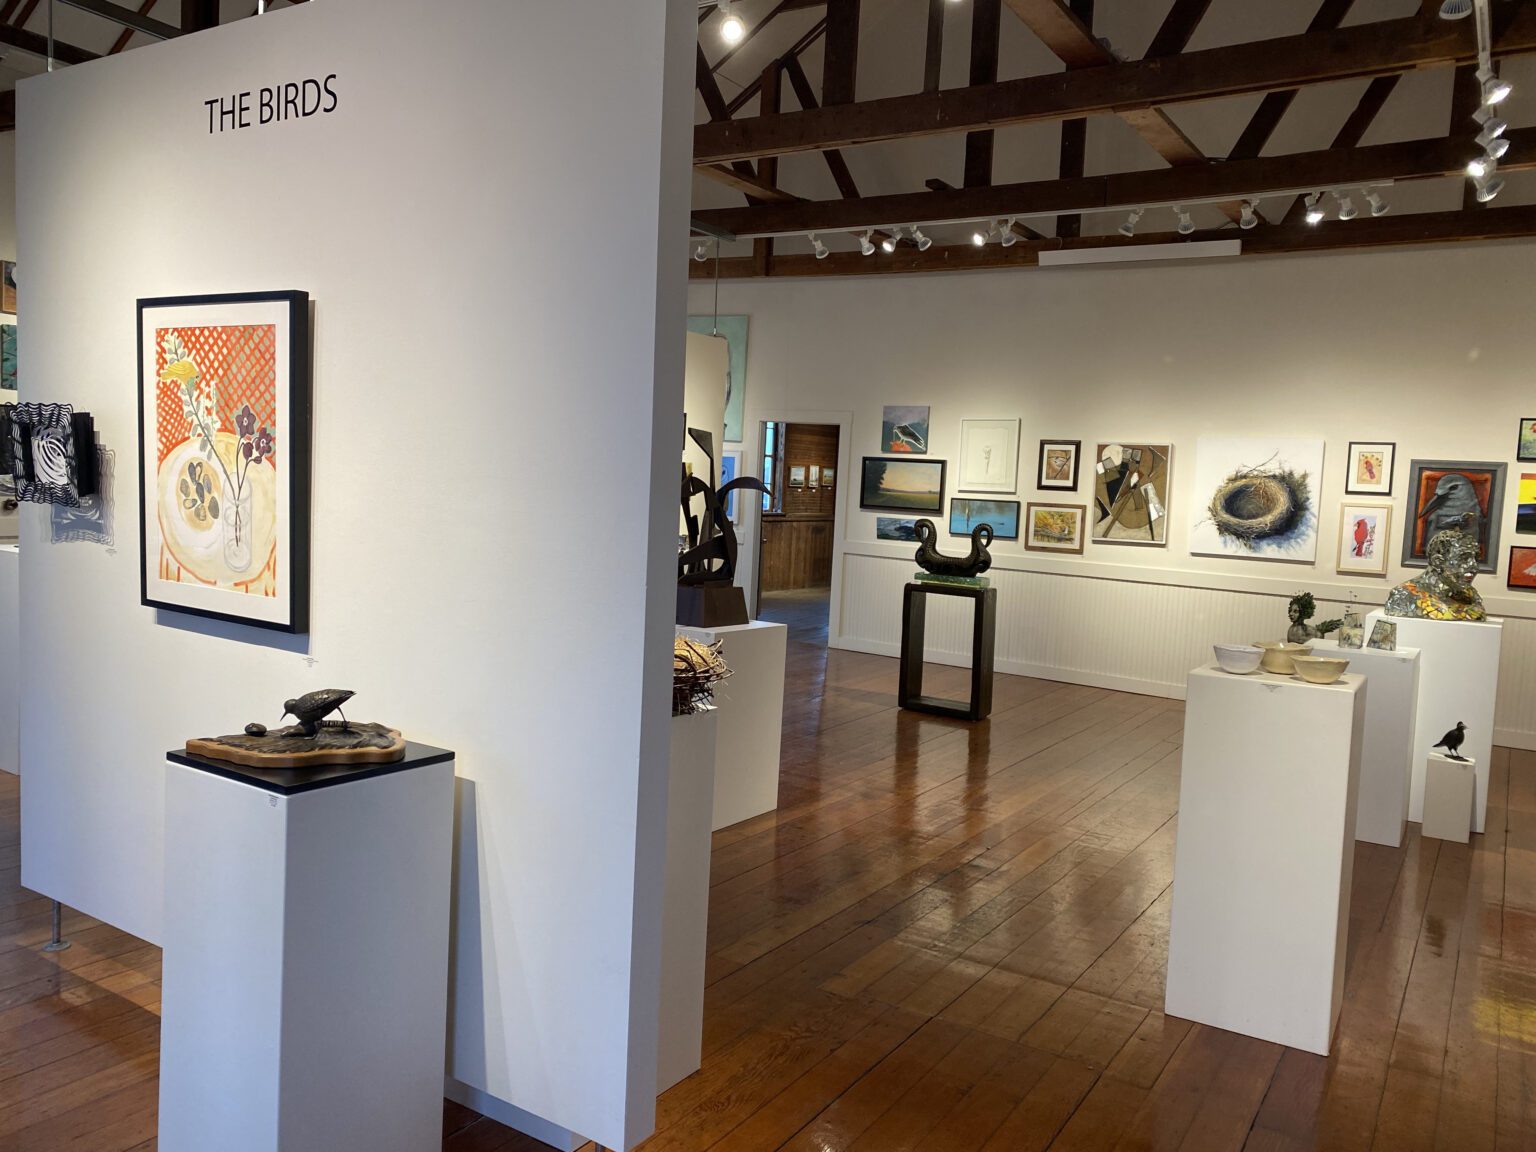 More than 50 artists contributed works to "The Birds